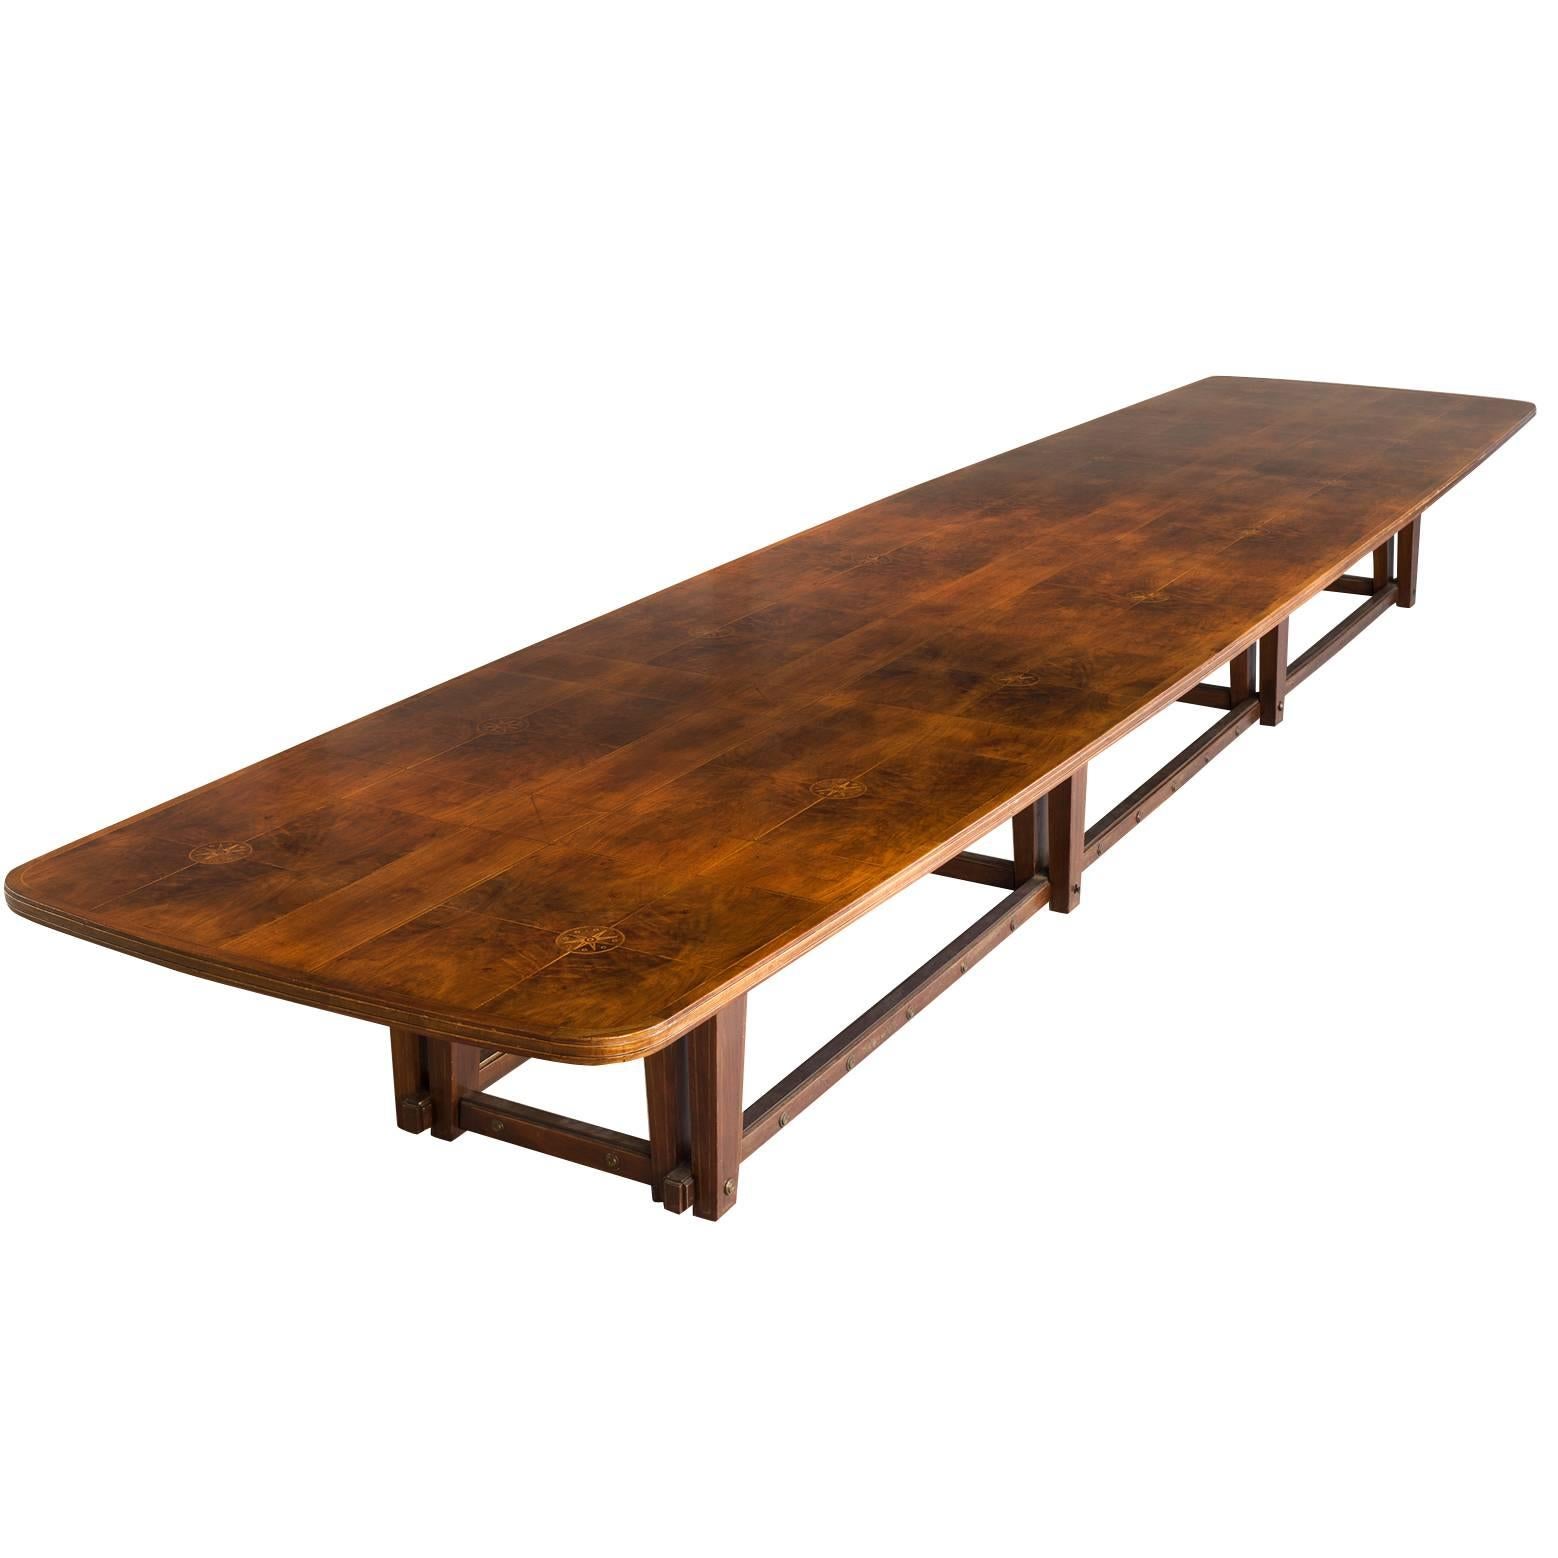 23ft / 720cm Extreme Large Conference Table in Walnut with Inlayed Top